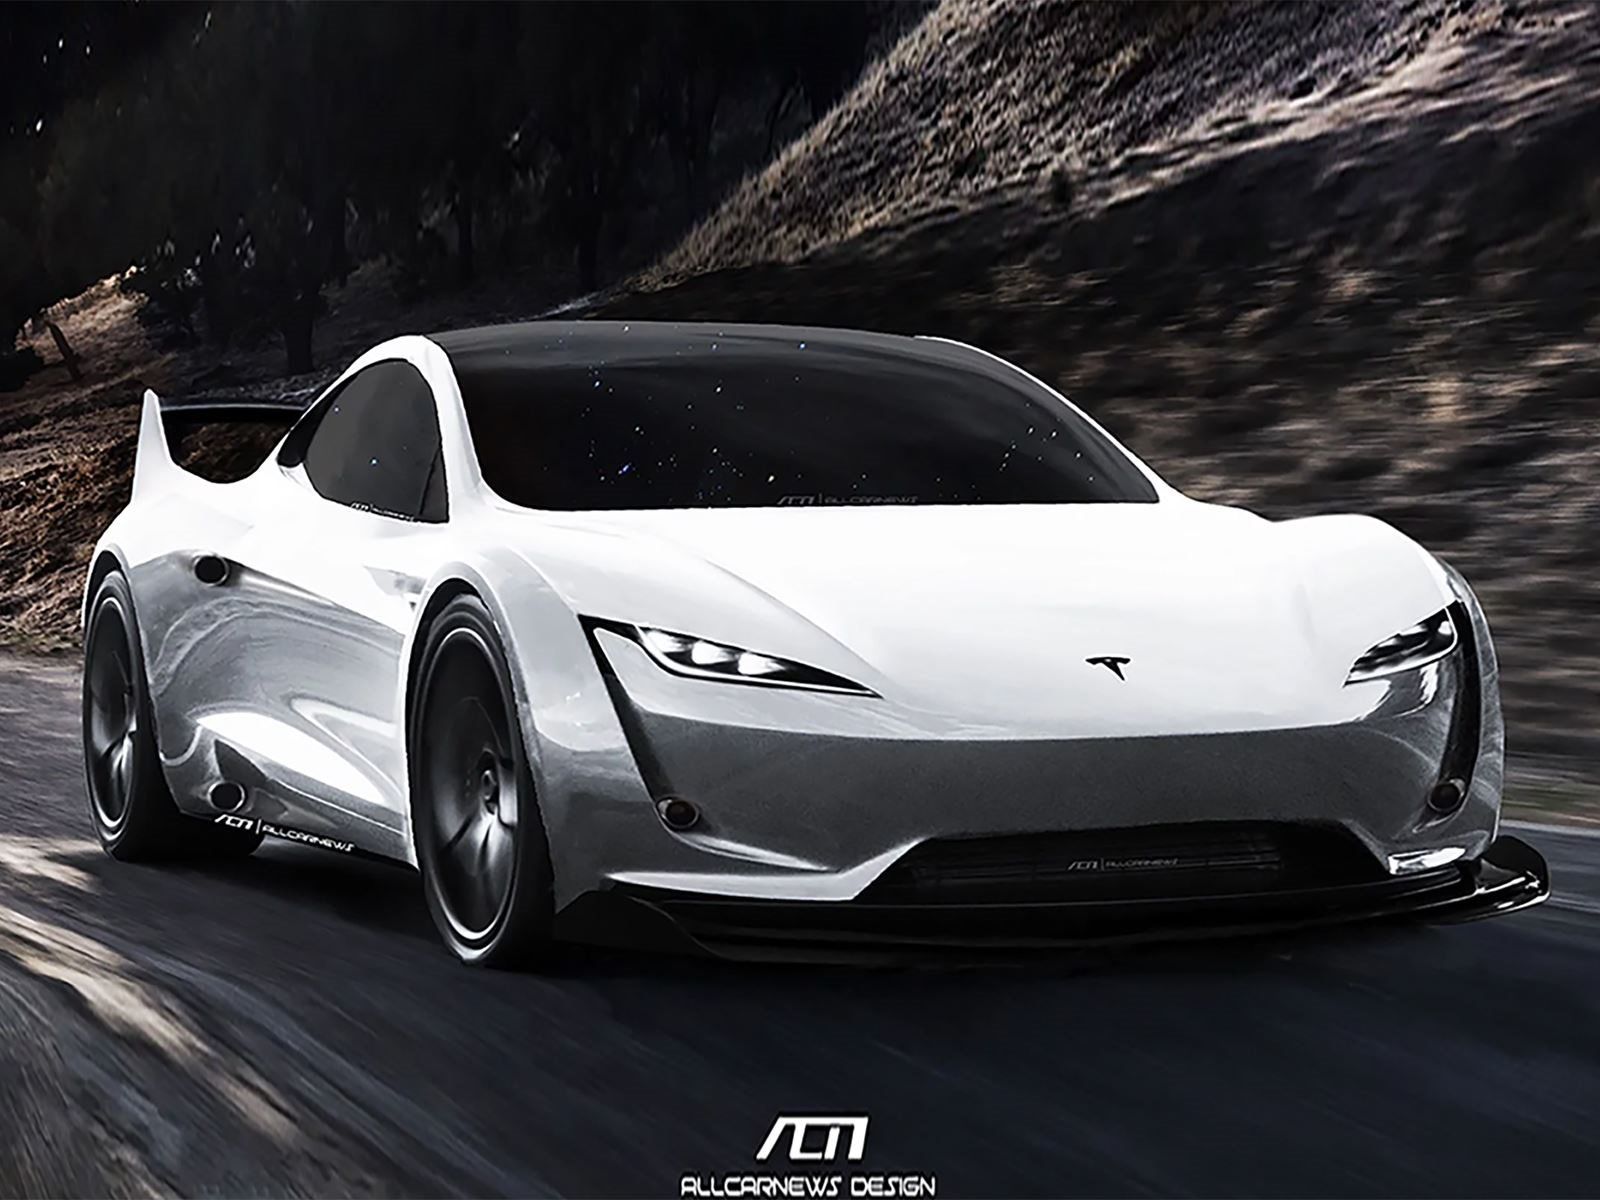 Will The Tesla Roadster SpaceX Look As Extreme As This?